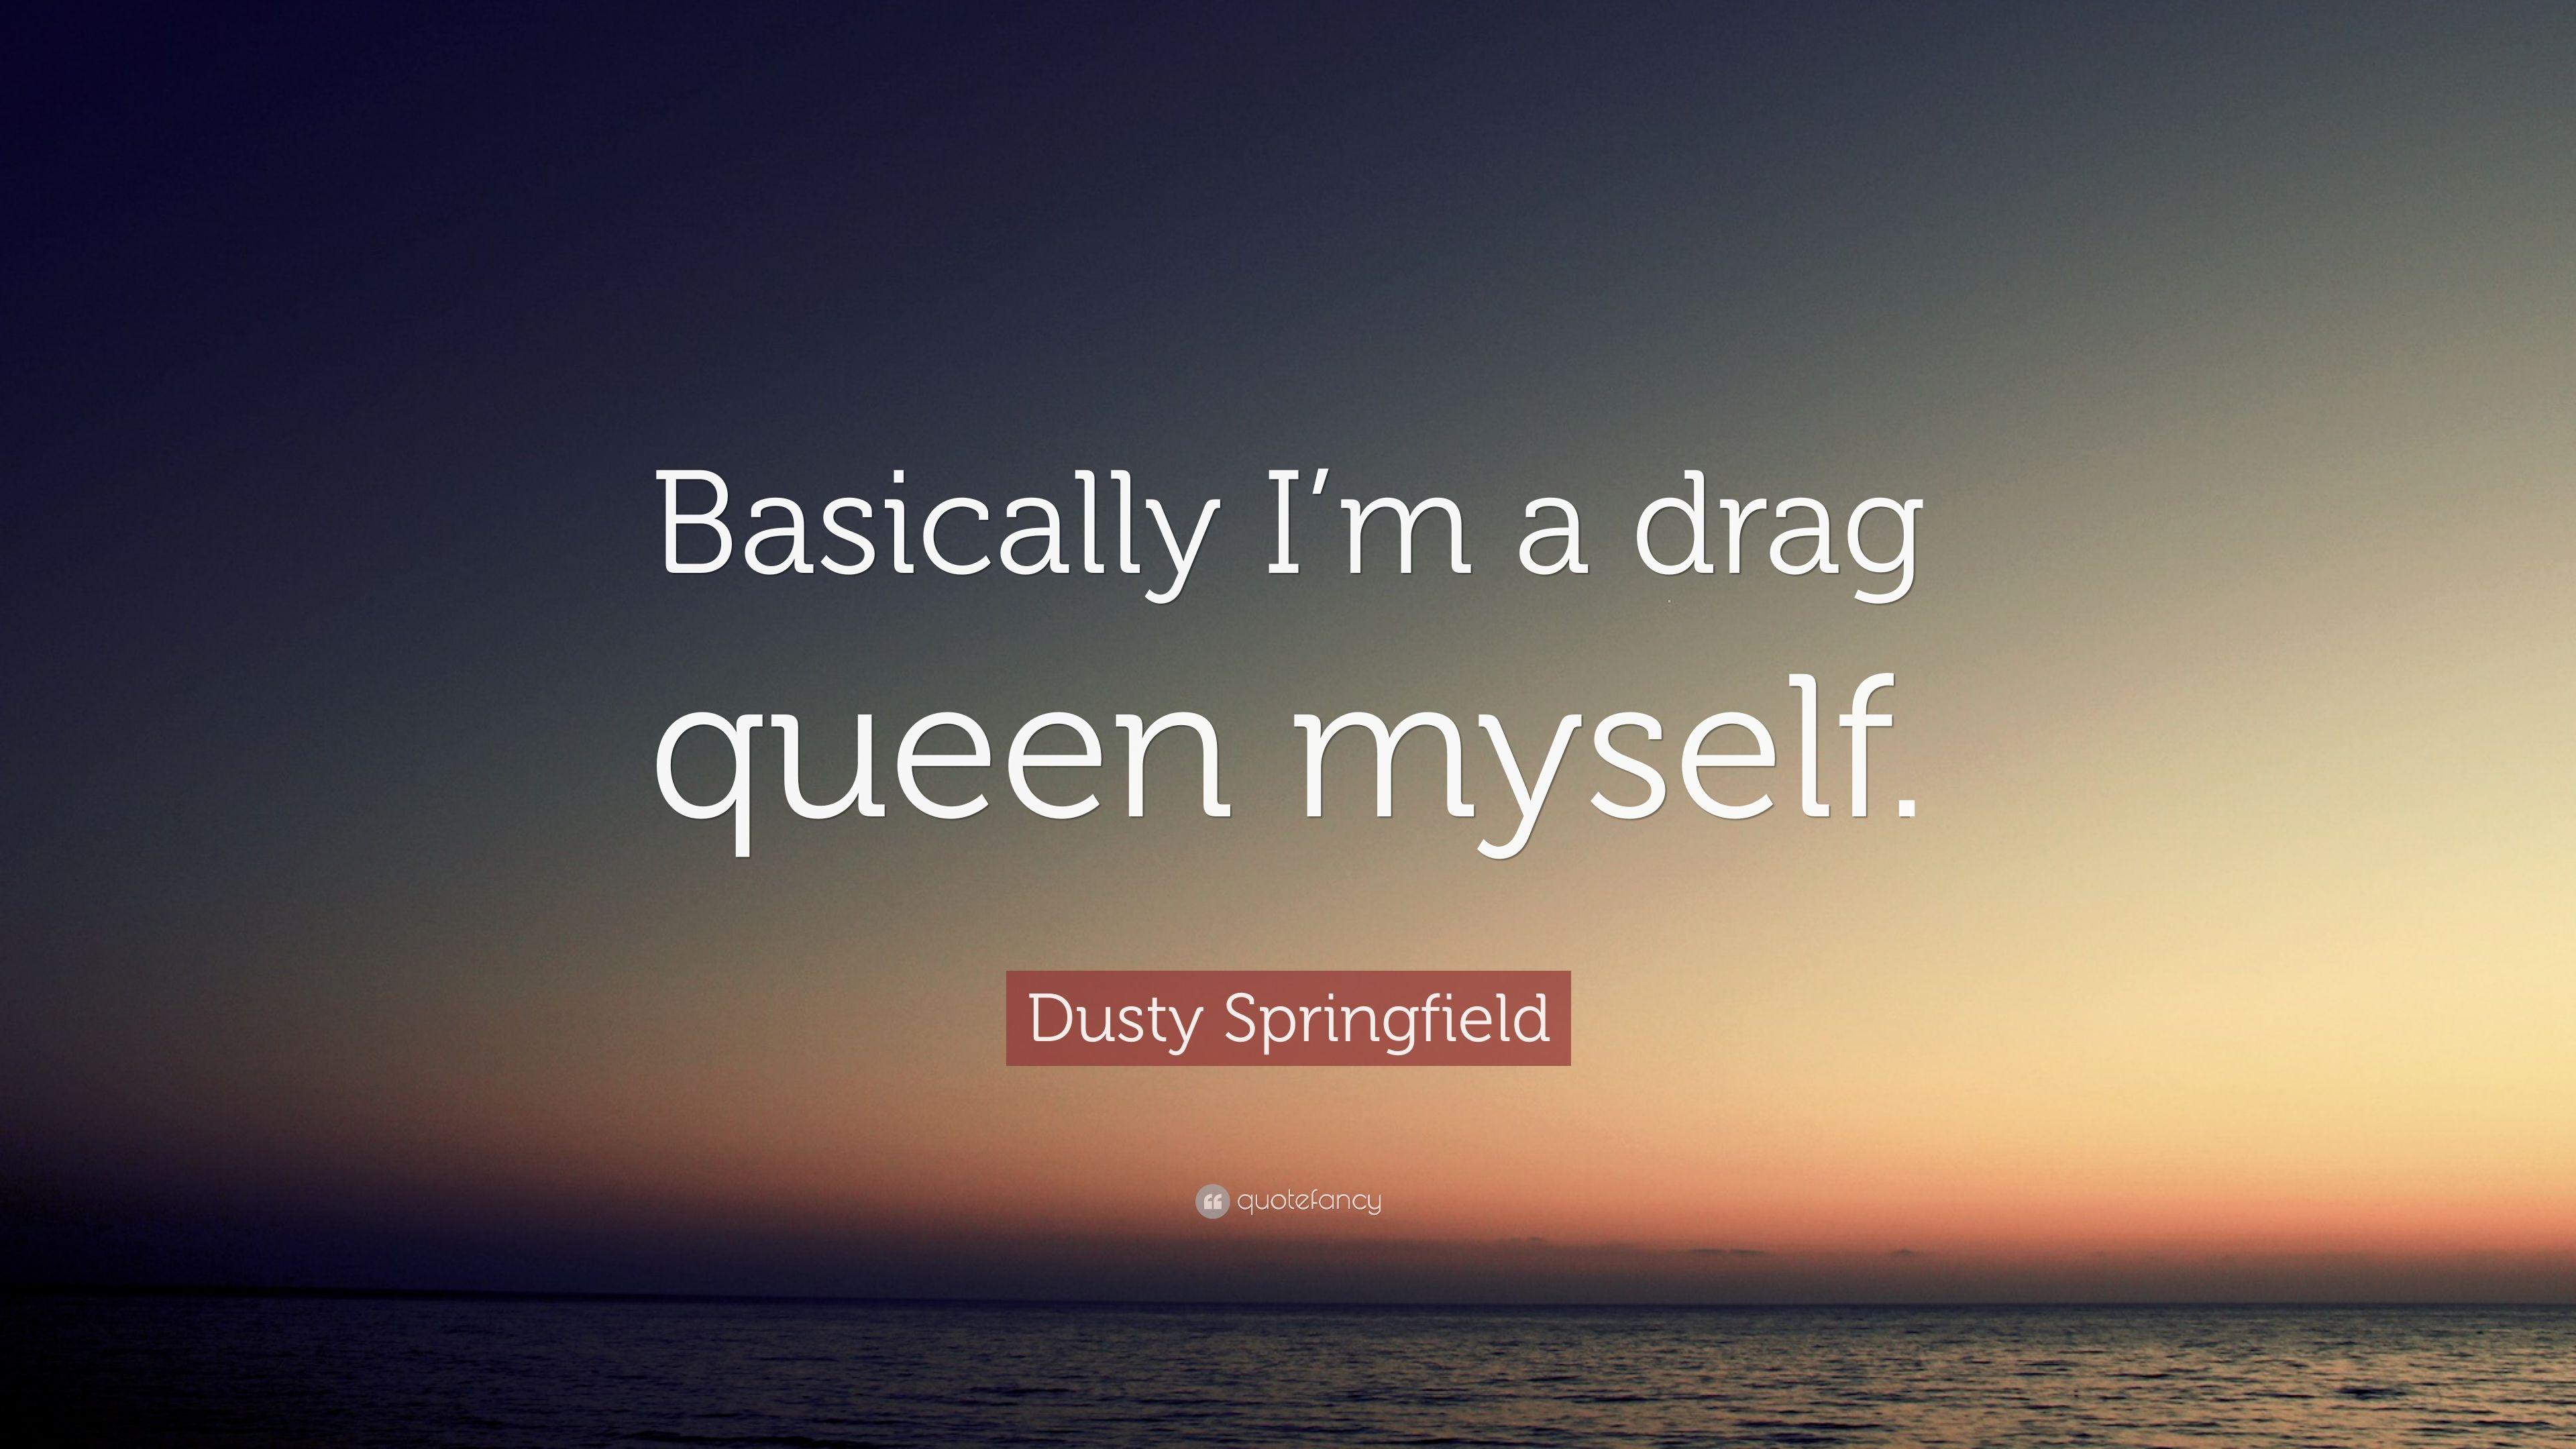 Dusty Springfield Quote: “Basically I'm a drag queen myself.” 7